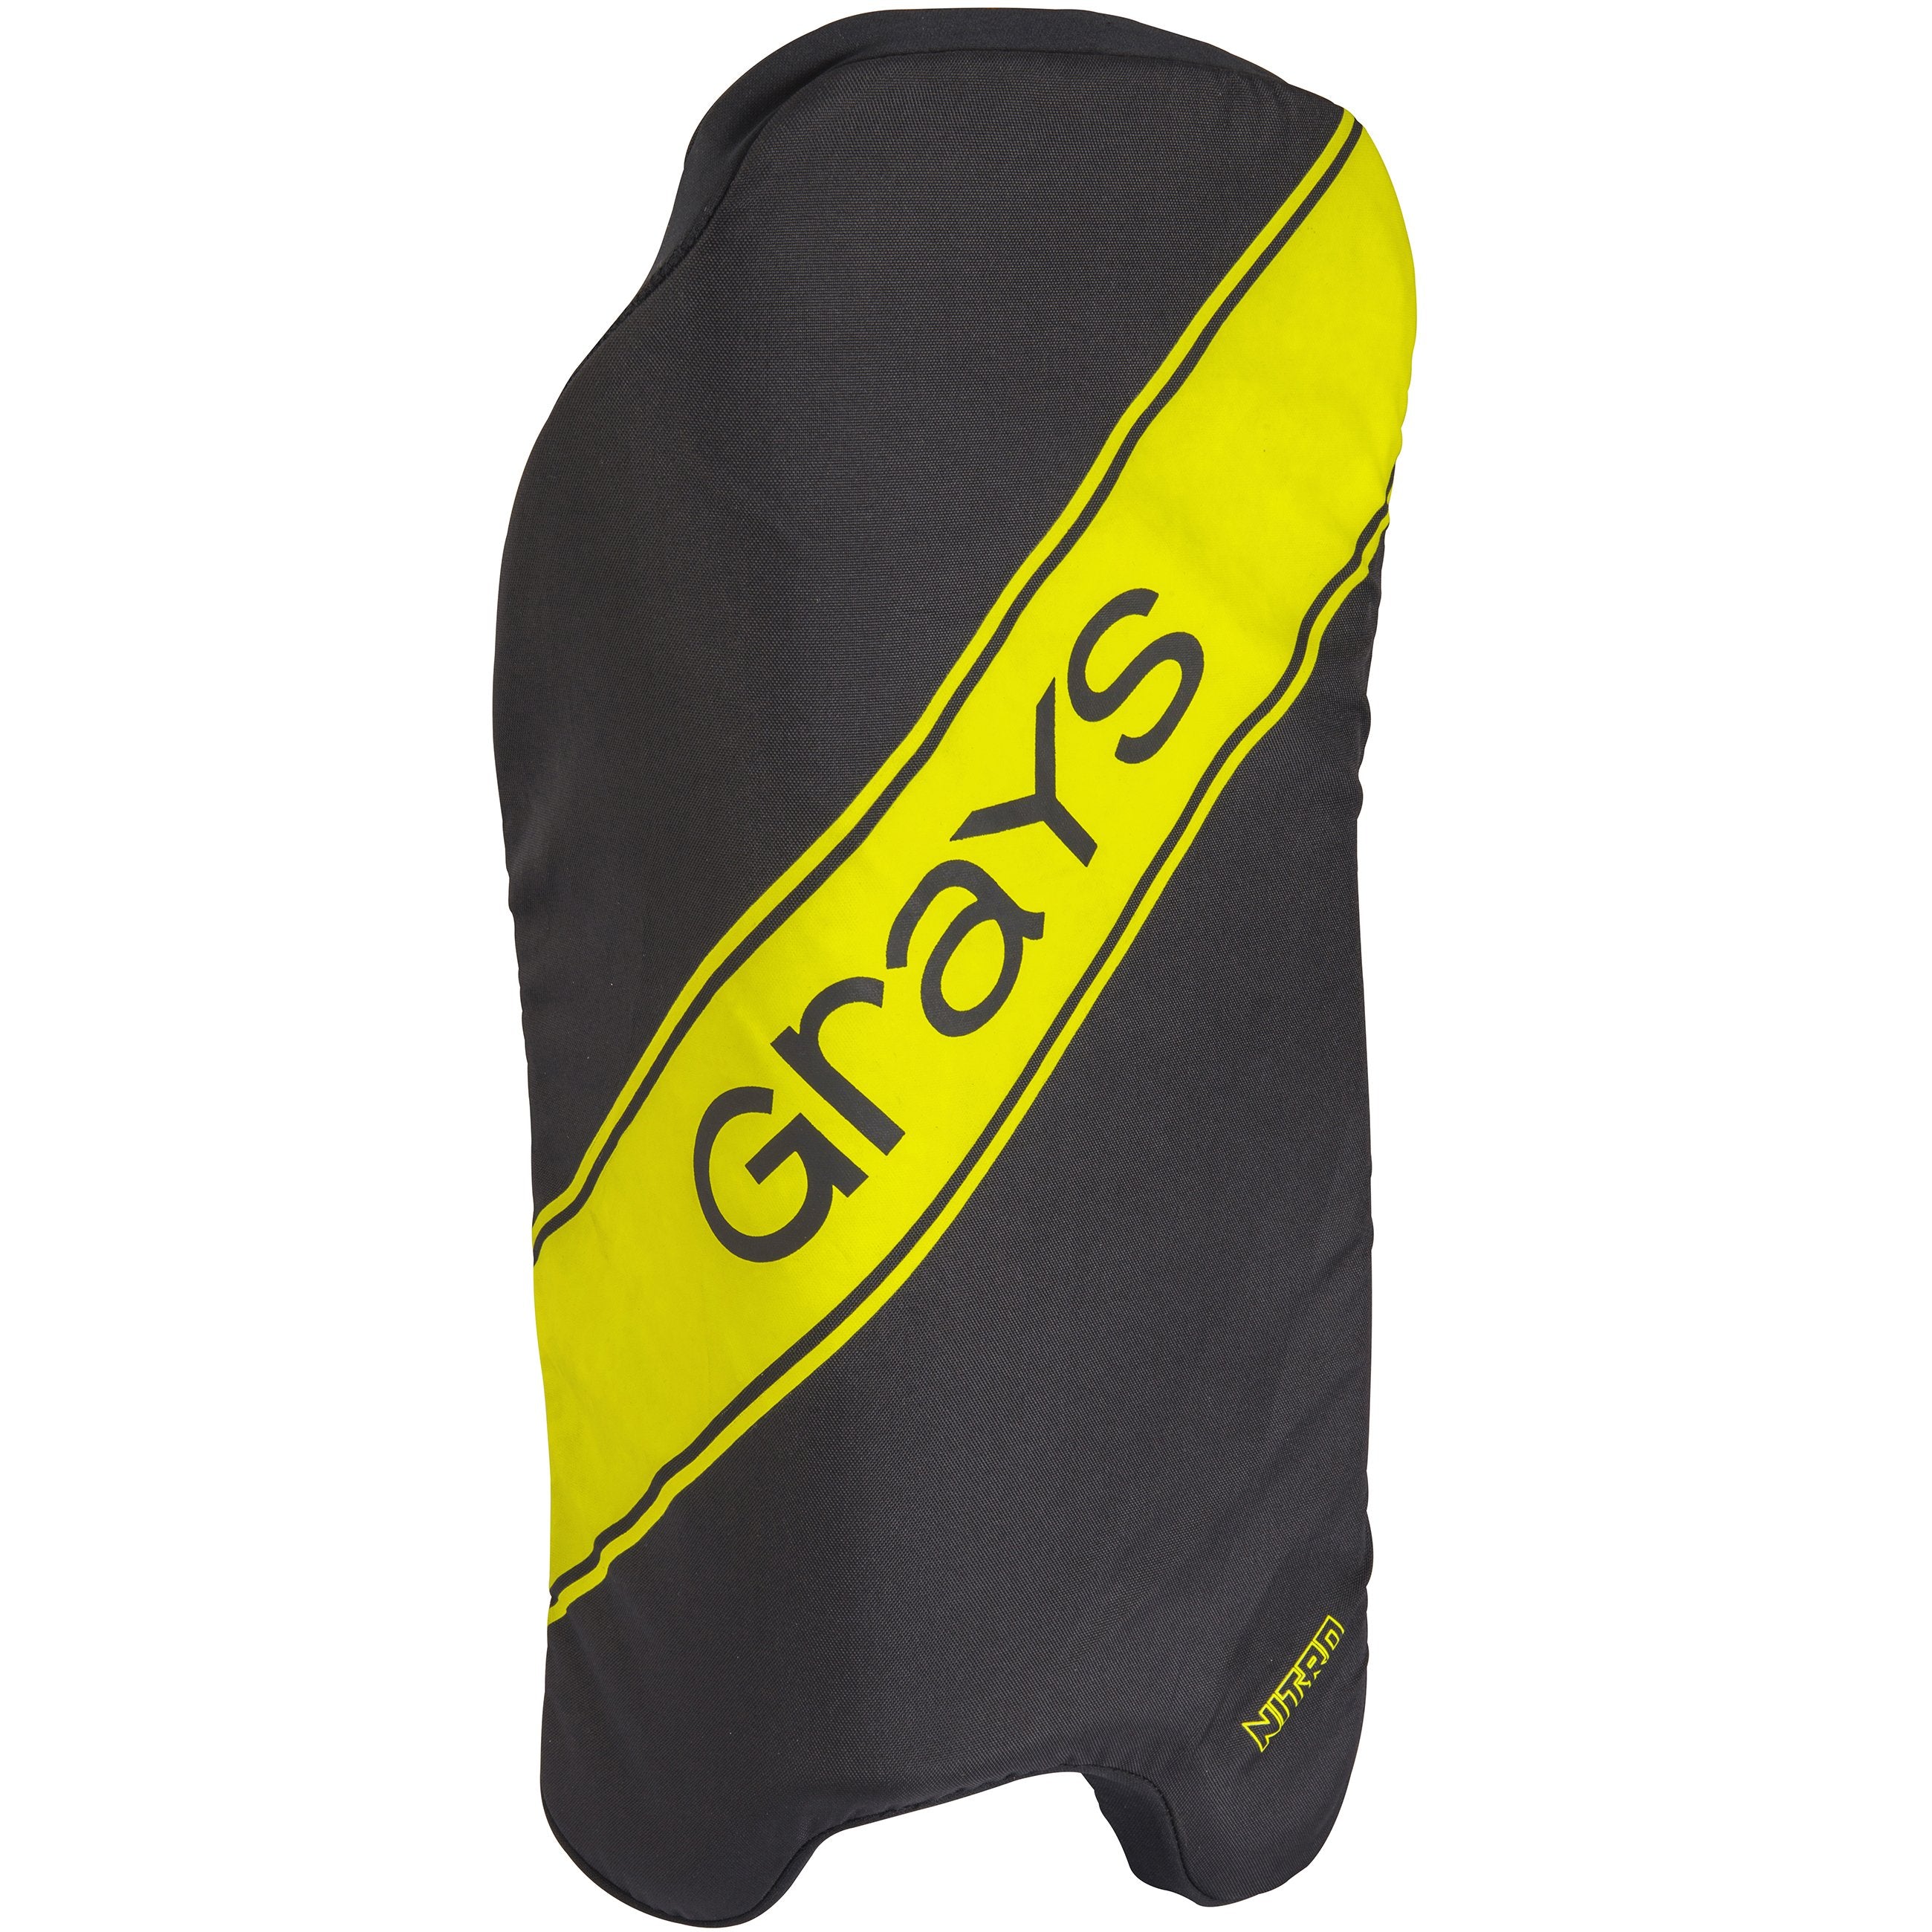 2600 921105 GK NITRO INDOOR PAD COVERS FRONT